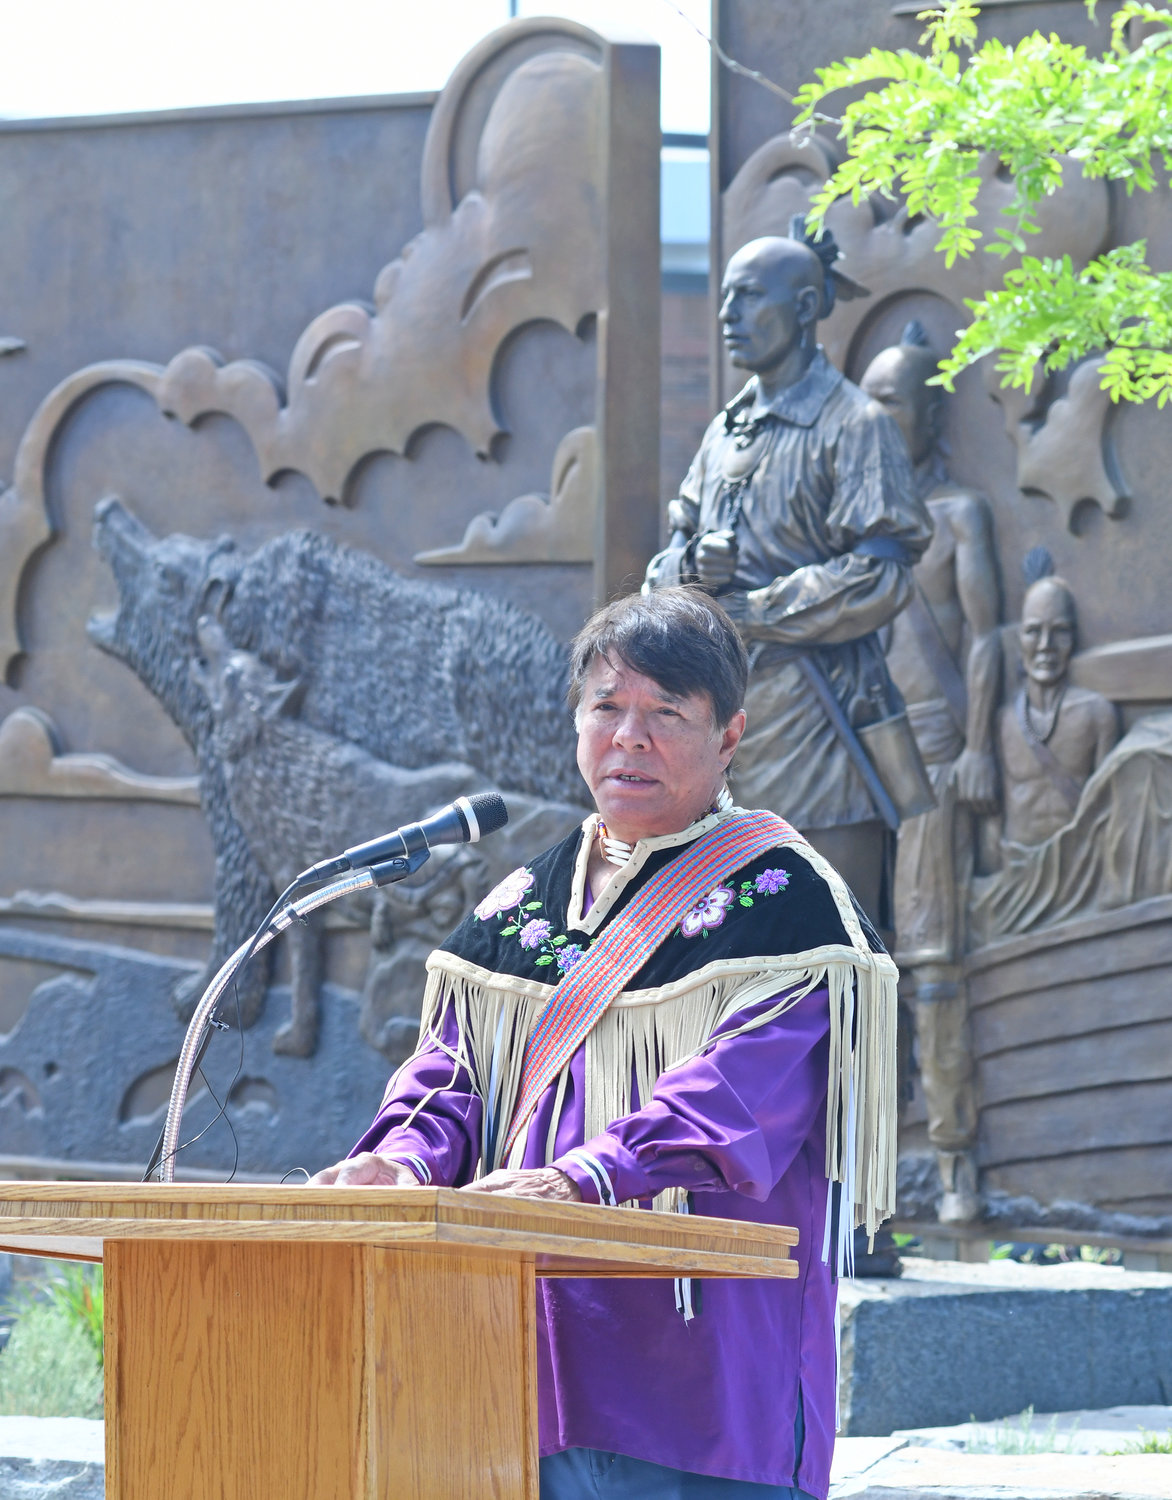 RECOGNIZING A NATION — Oneida Nation Representative Ray Halbritter gives remarks to the crowd gathered for the unveiling of the bronze Oneida monument located downtown.